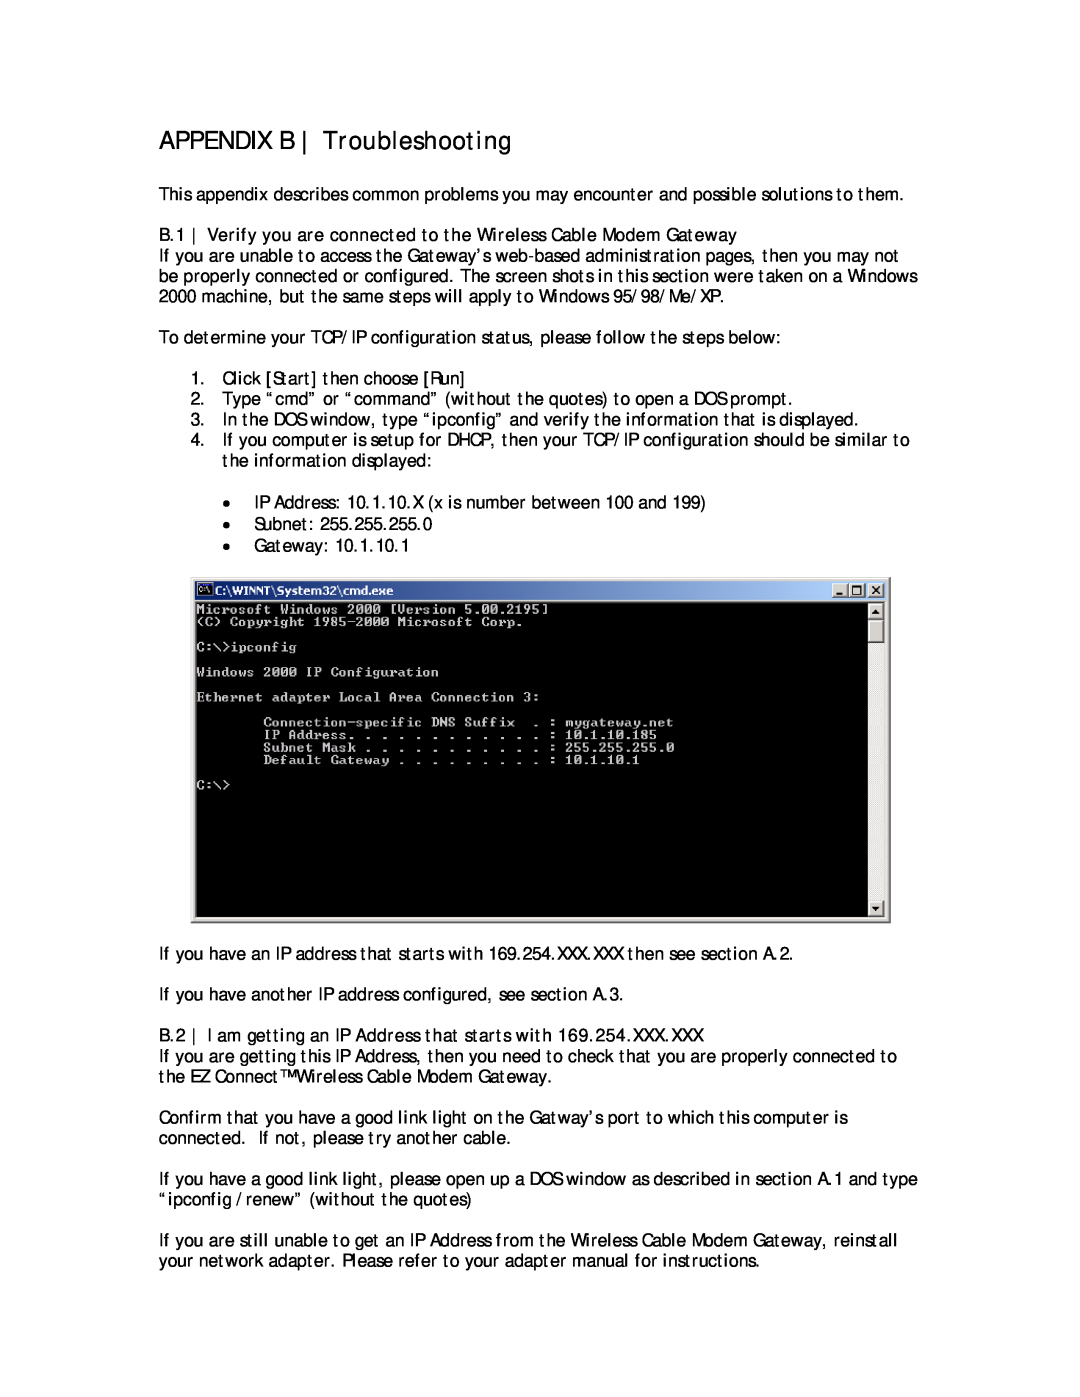 SMC Networks SMC8013WG manual APPENDIX B Troubleshooting, B.1 Verify you are connected to the Wireless Cable Modem Gateway 